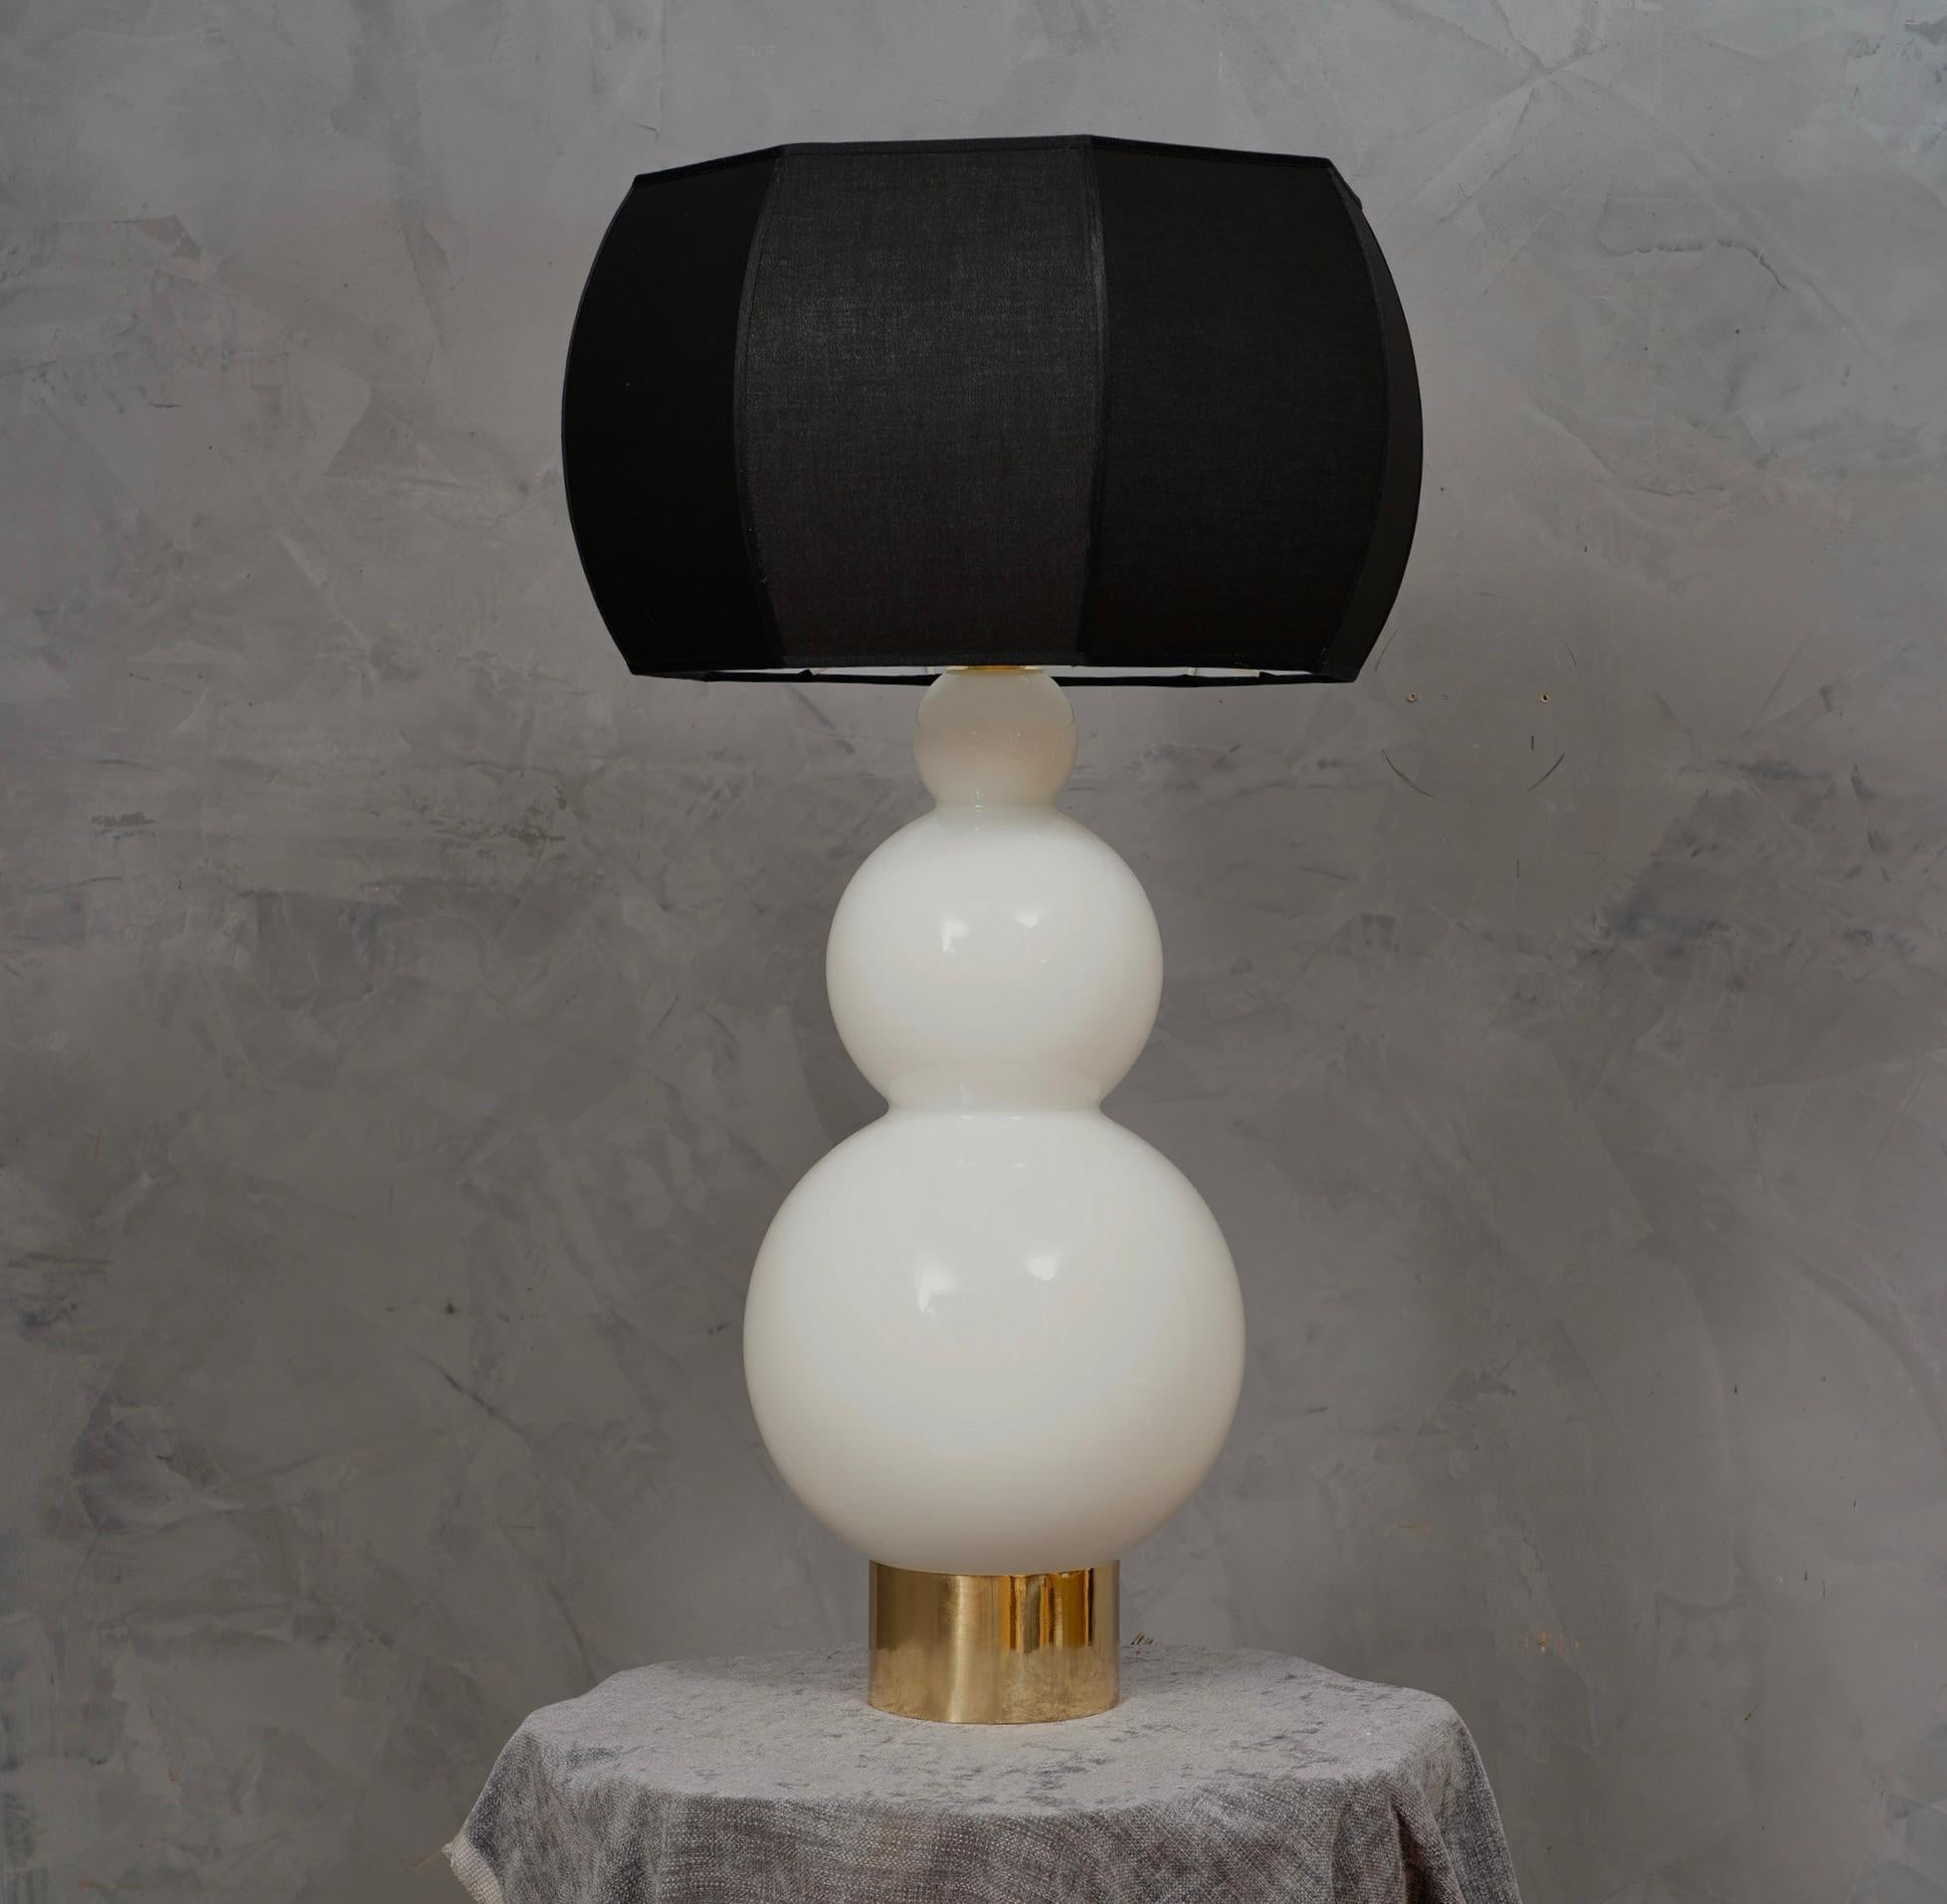 Precious and unique hand-blown Murano white glass, classic but original design with a strong contrast between the white of the glass and the black of its lampshade.

The lamp is composed of a rich cylindrical brass base on which the glass with its